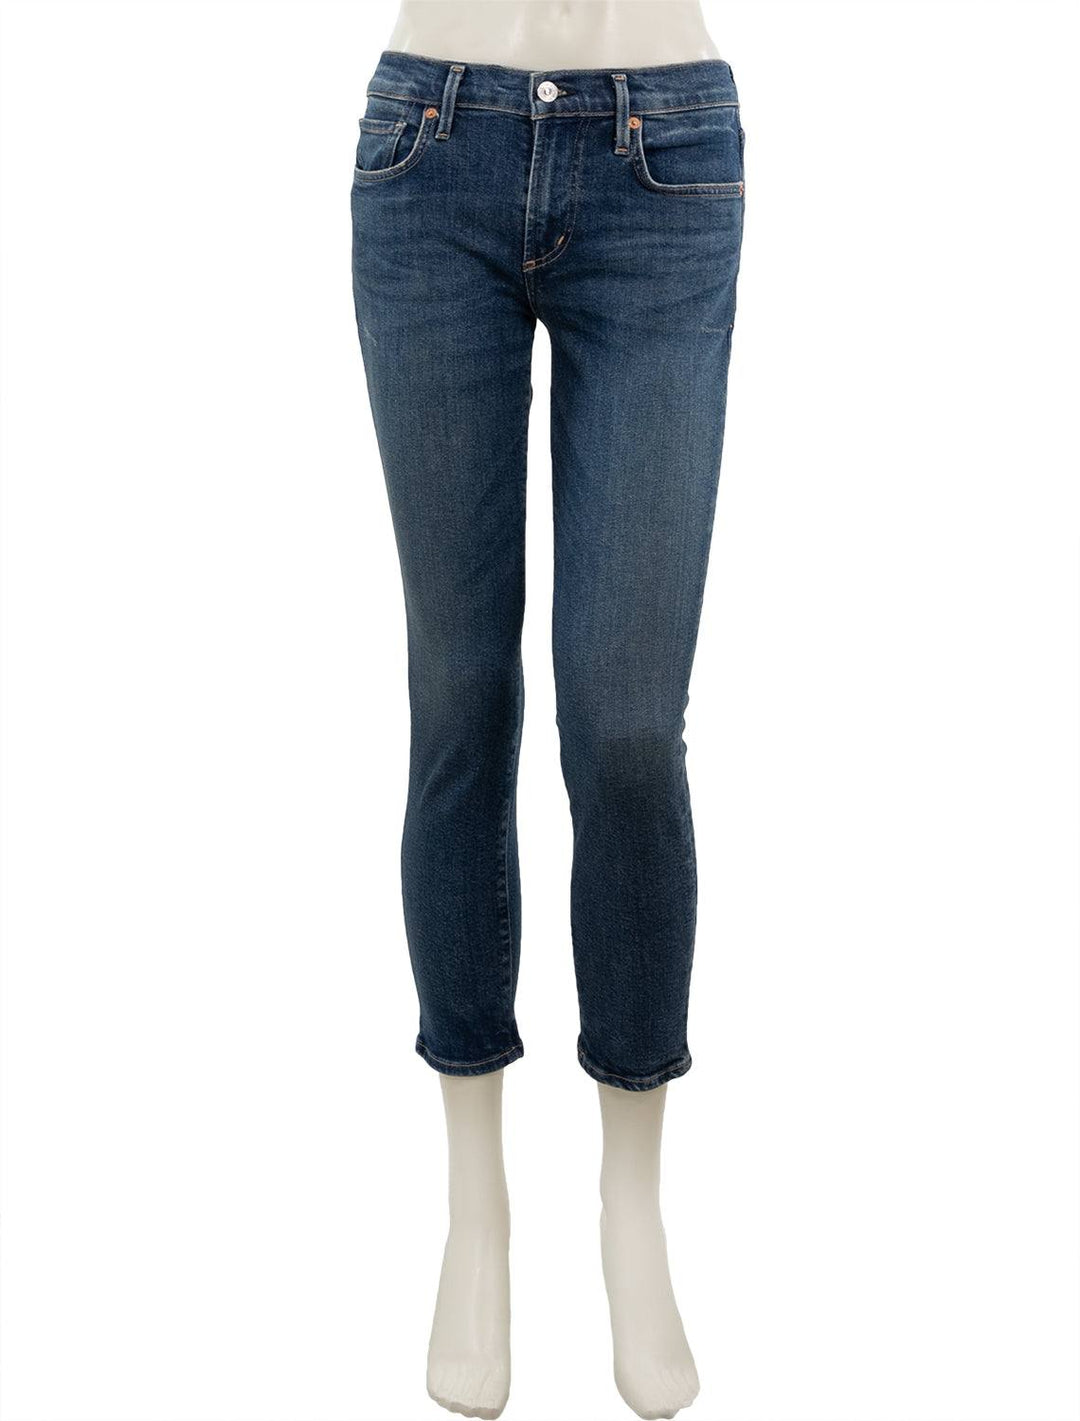 Front view of Citizen of Humanity's Ella Mid Rise Jeans in Sky Lantern.